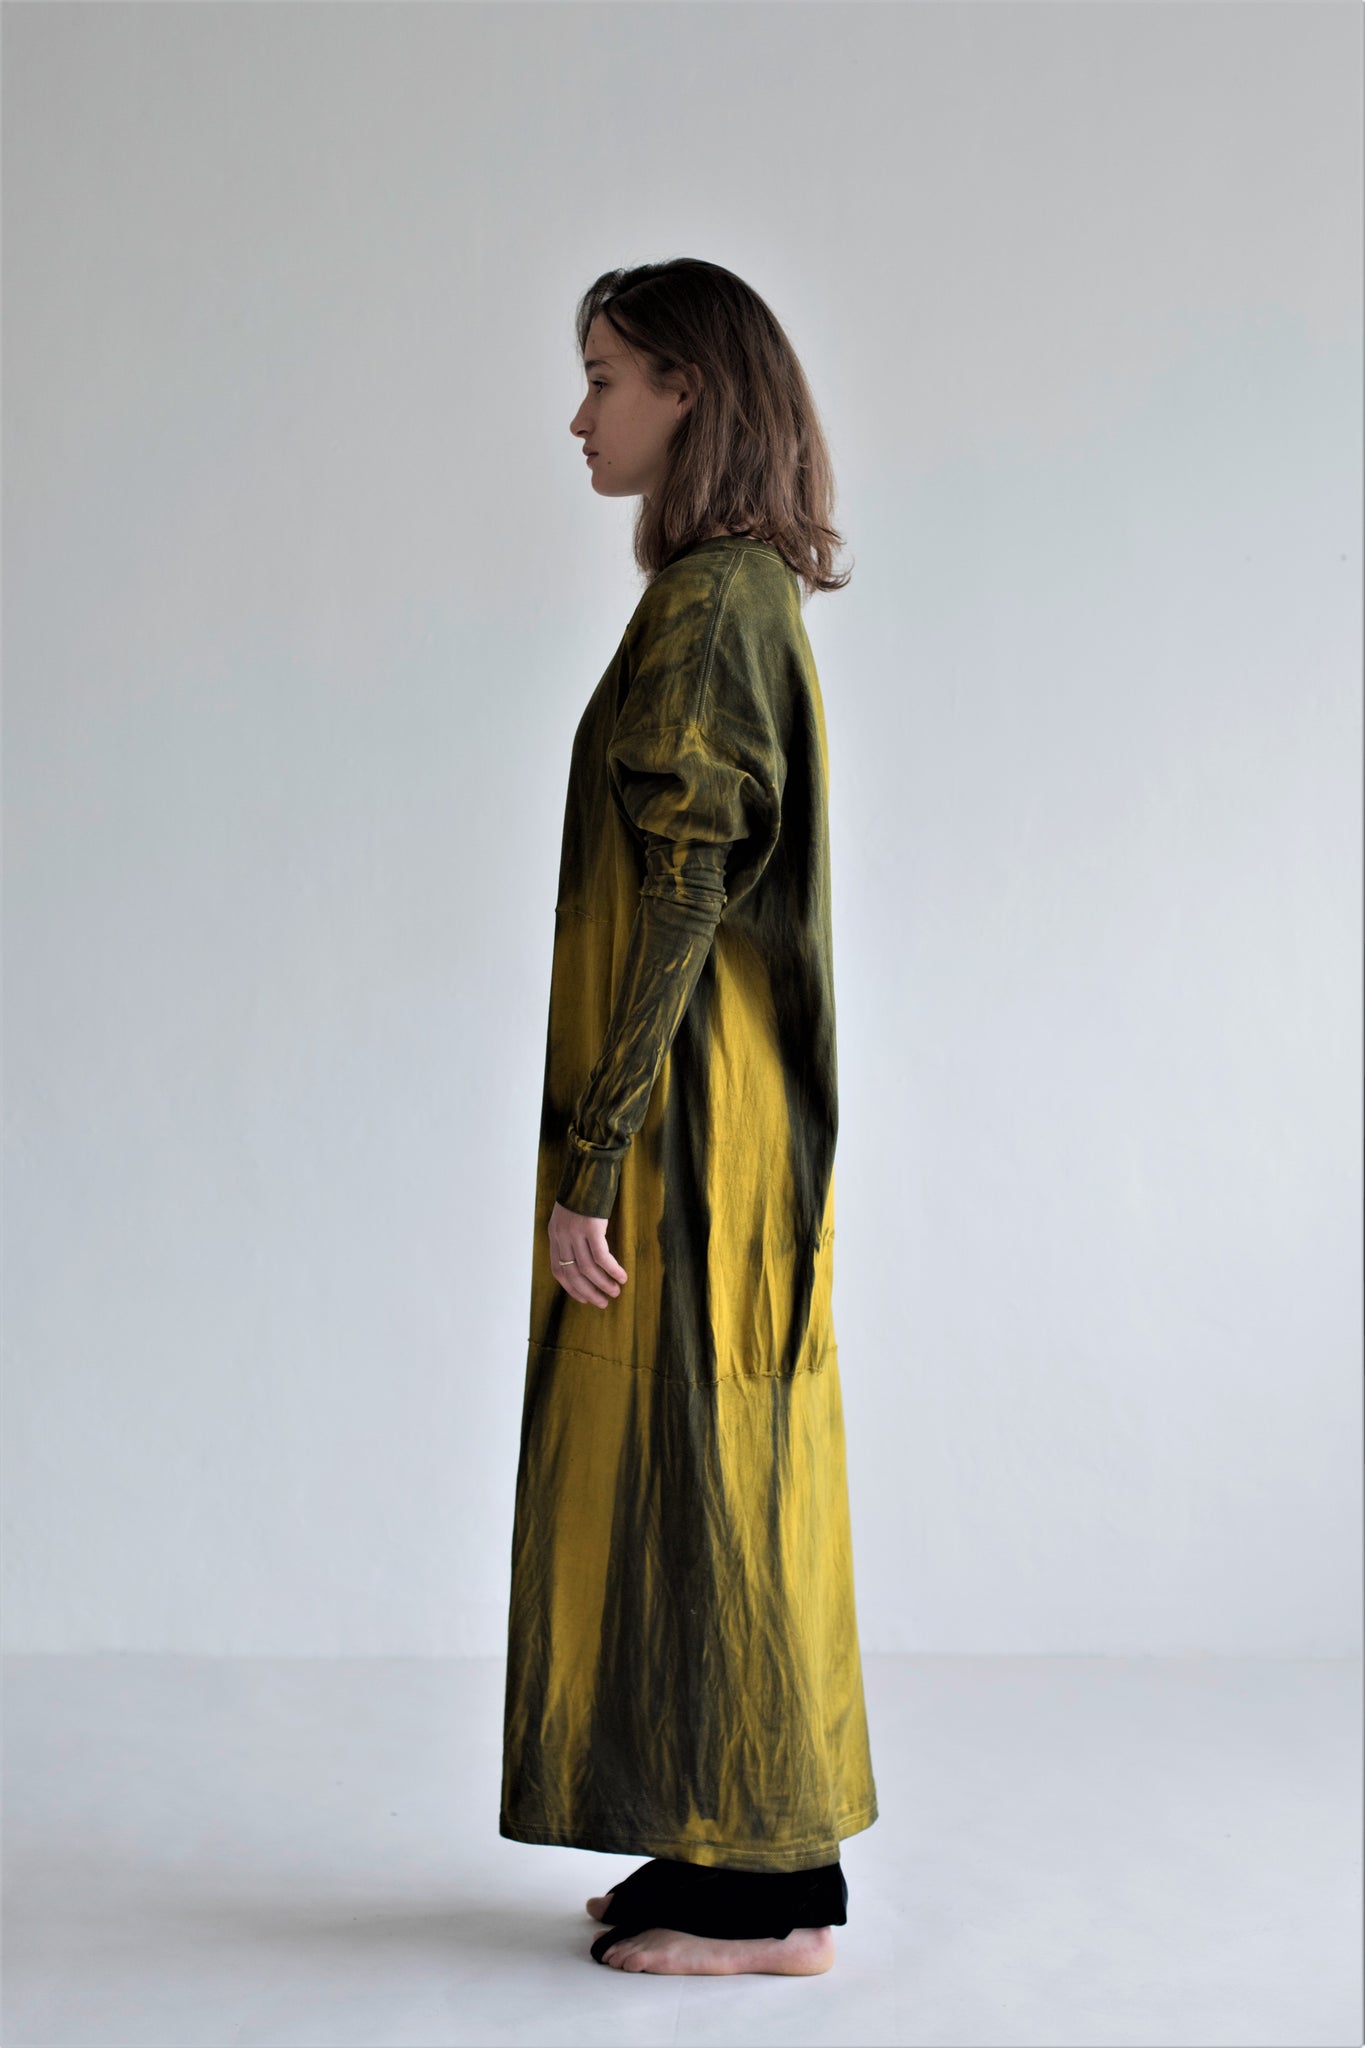 SATTELITE: A LONG DRESS RECONSTRUCTED FROM ADIDAS T-SHIRTS